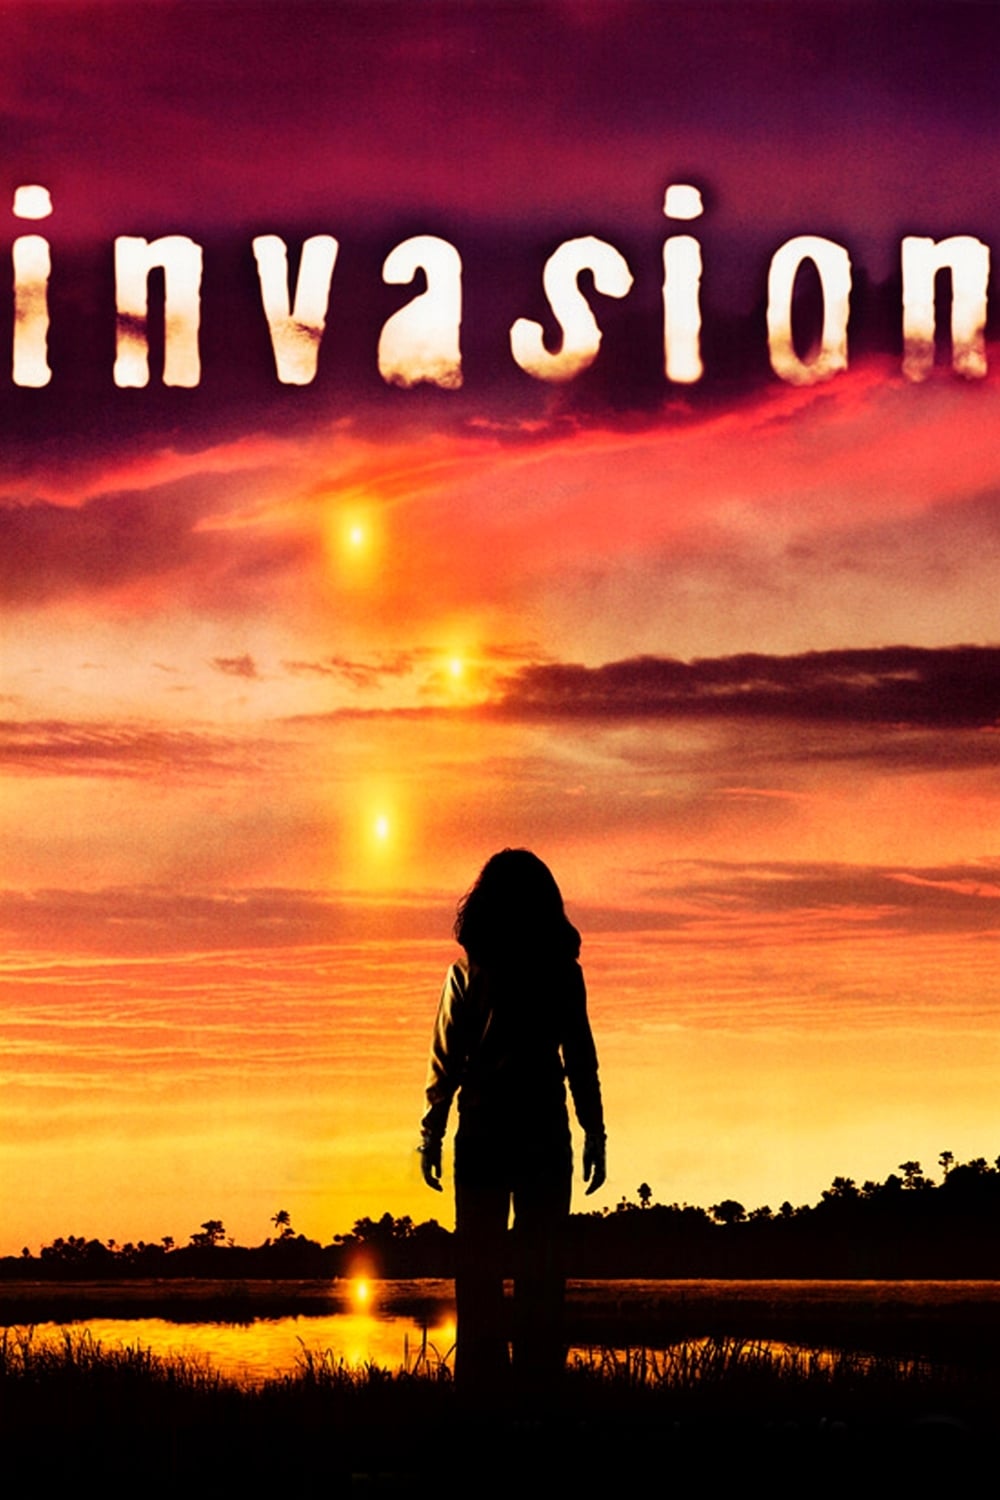 Invasion TV Shows About Cane